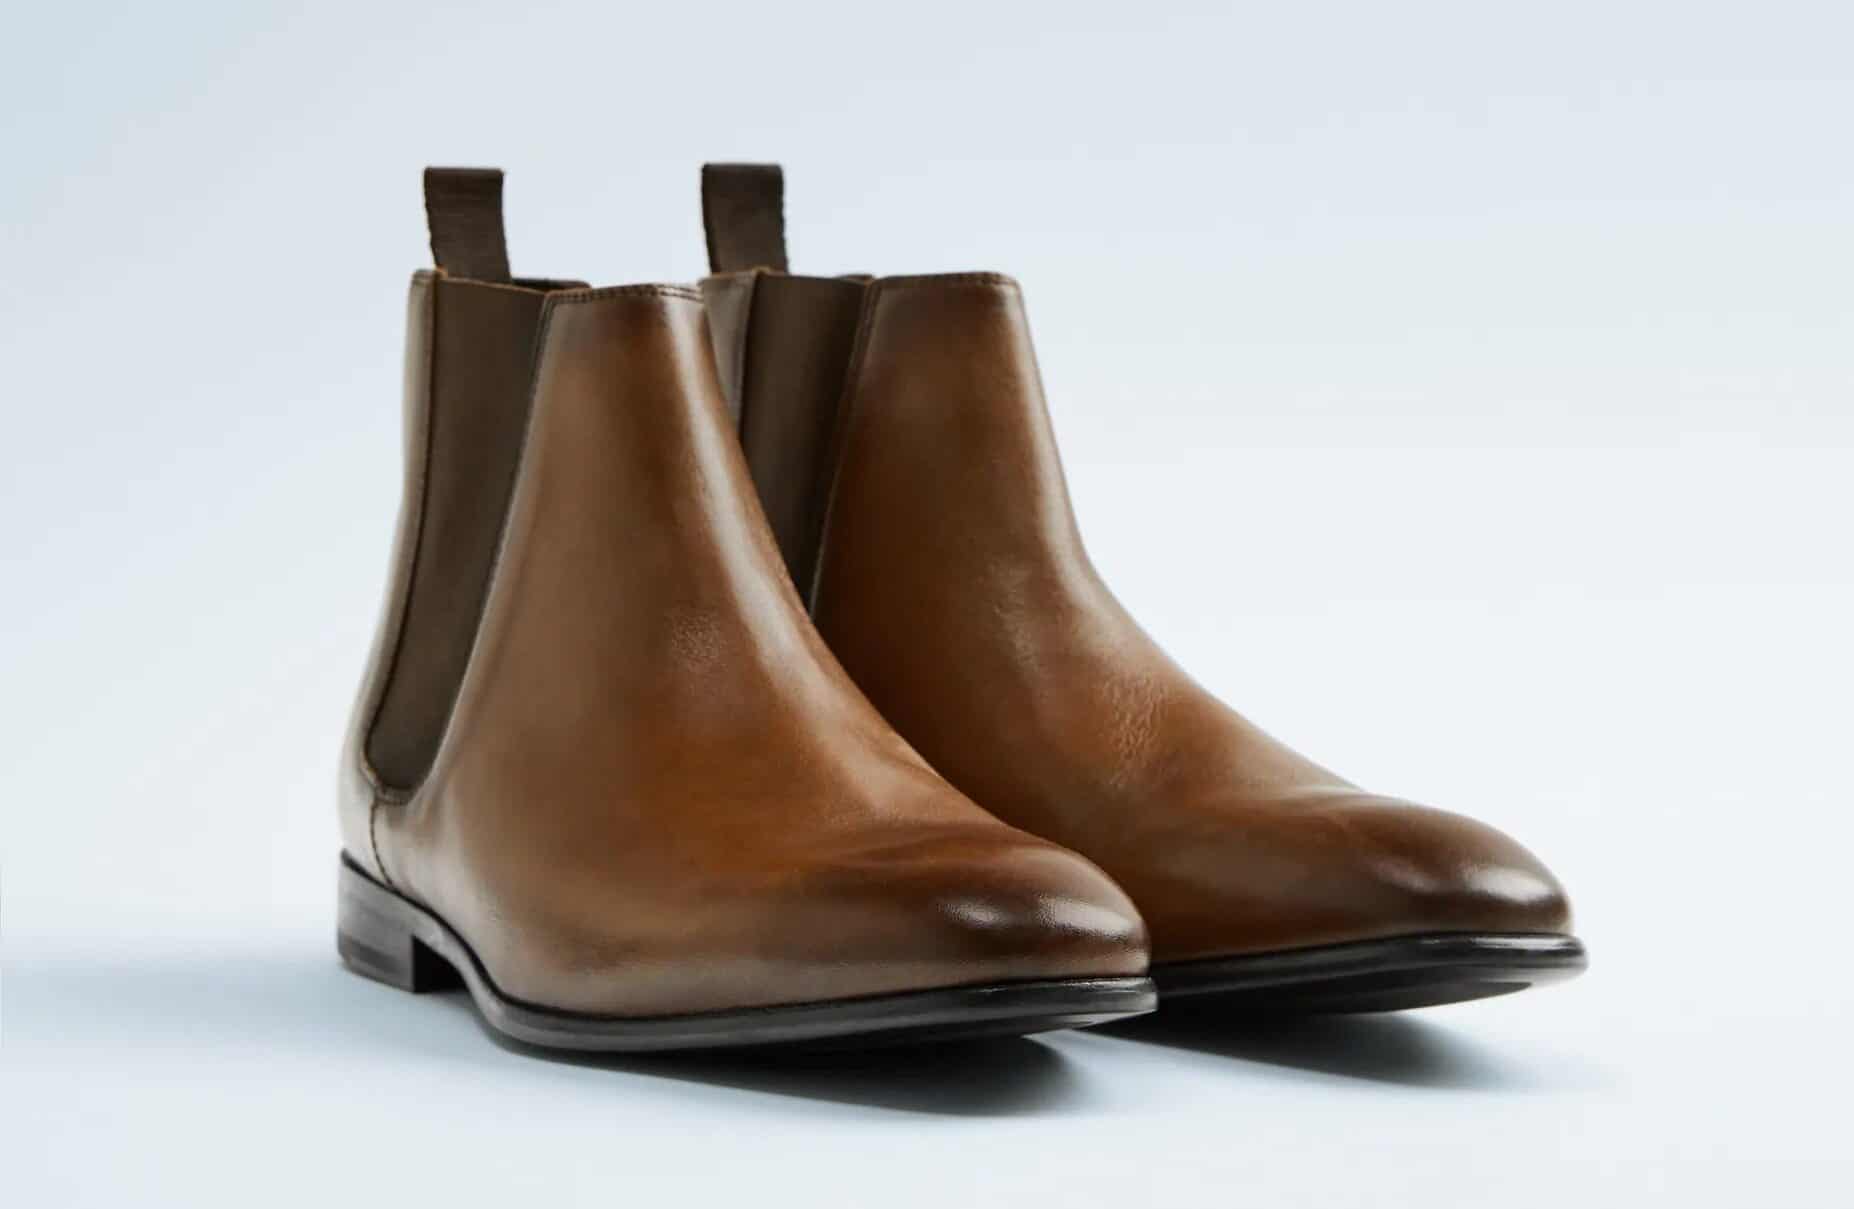 chelsea boots for sale near me